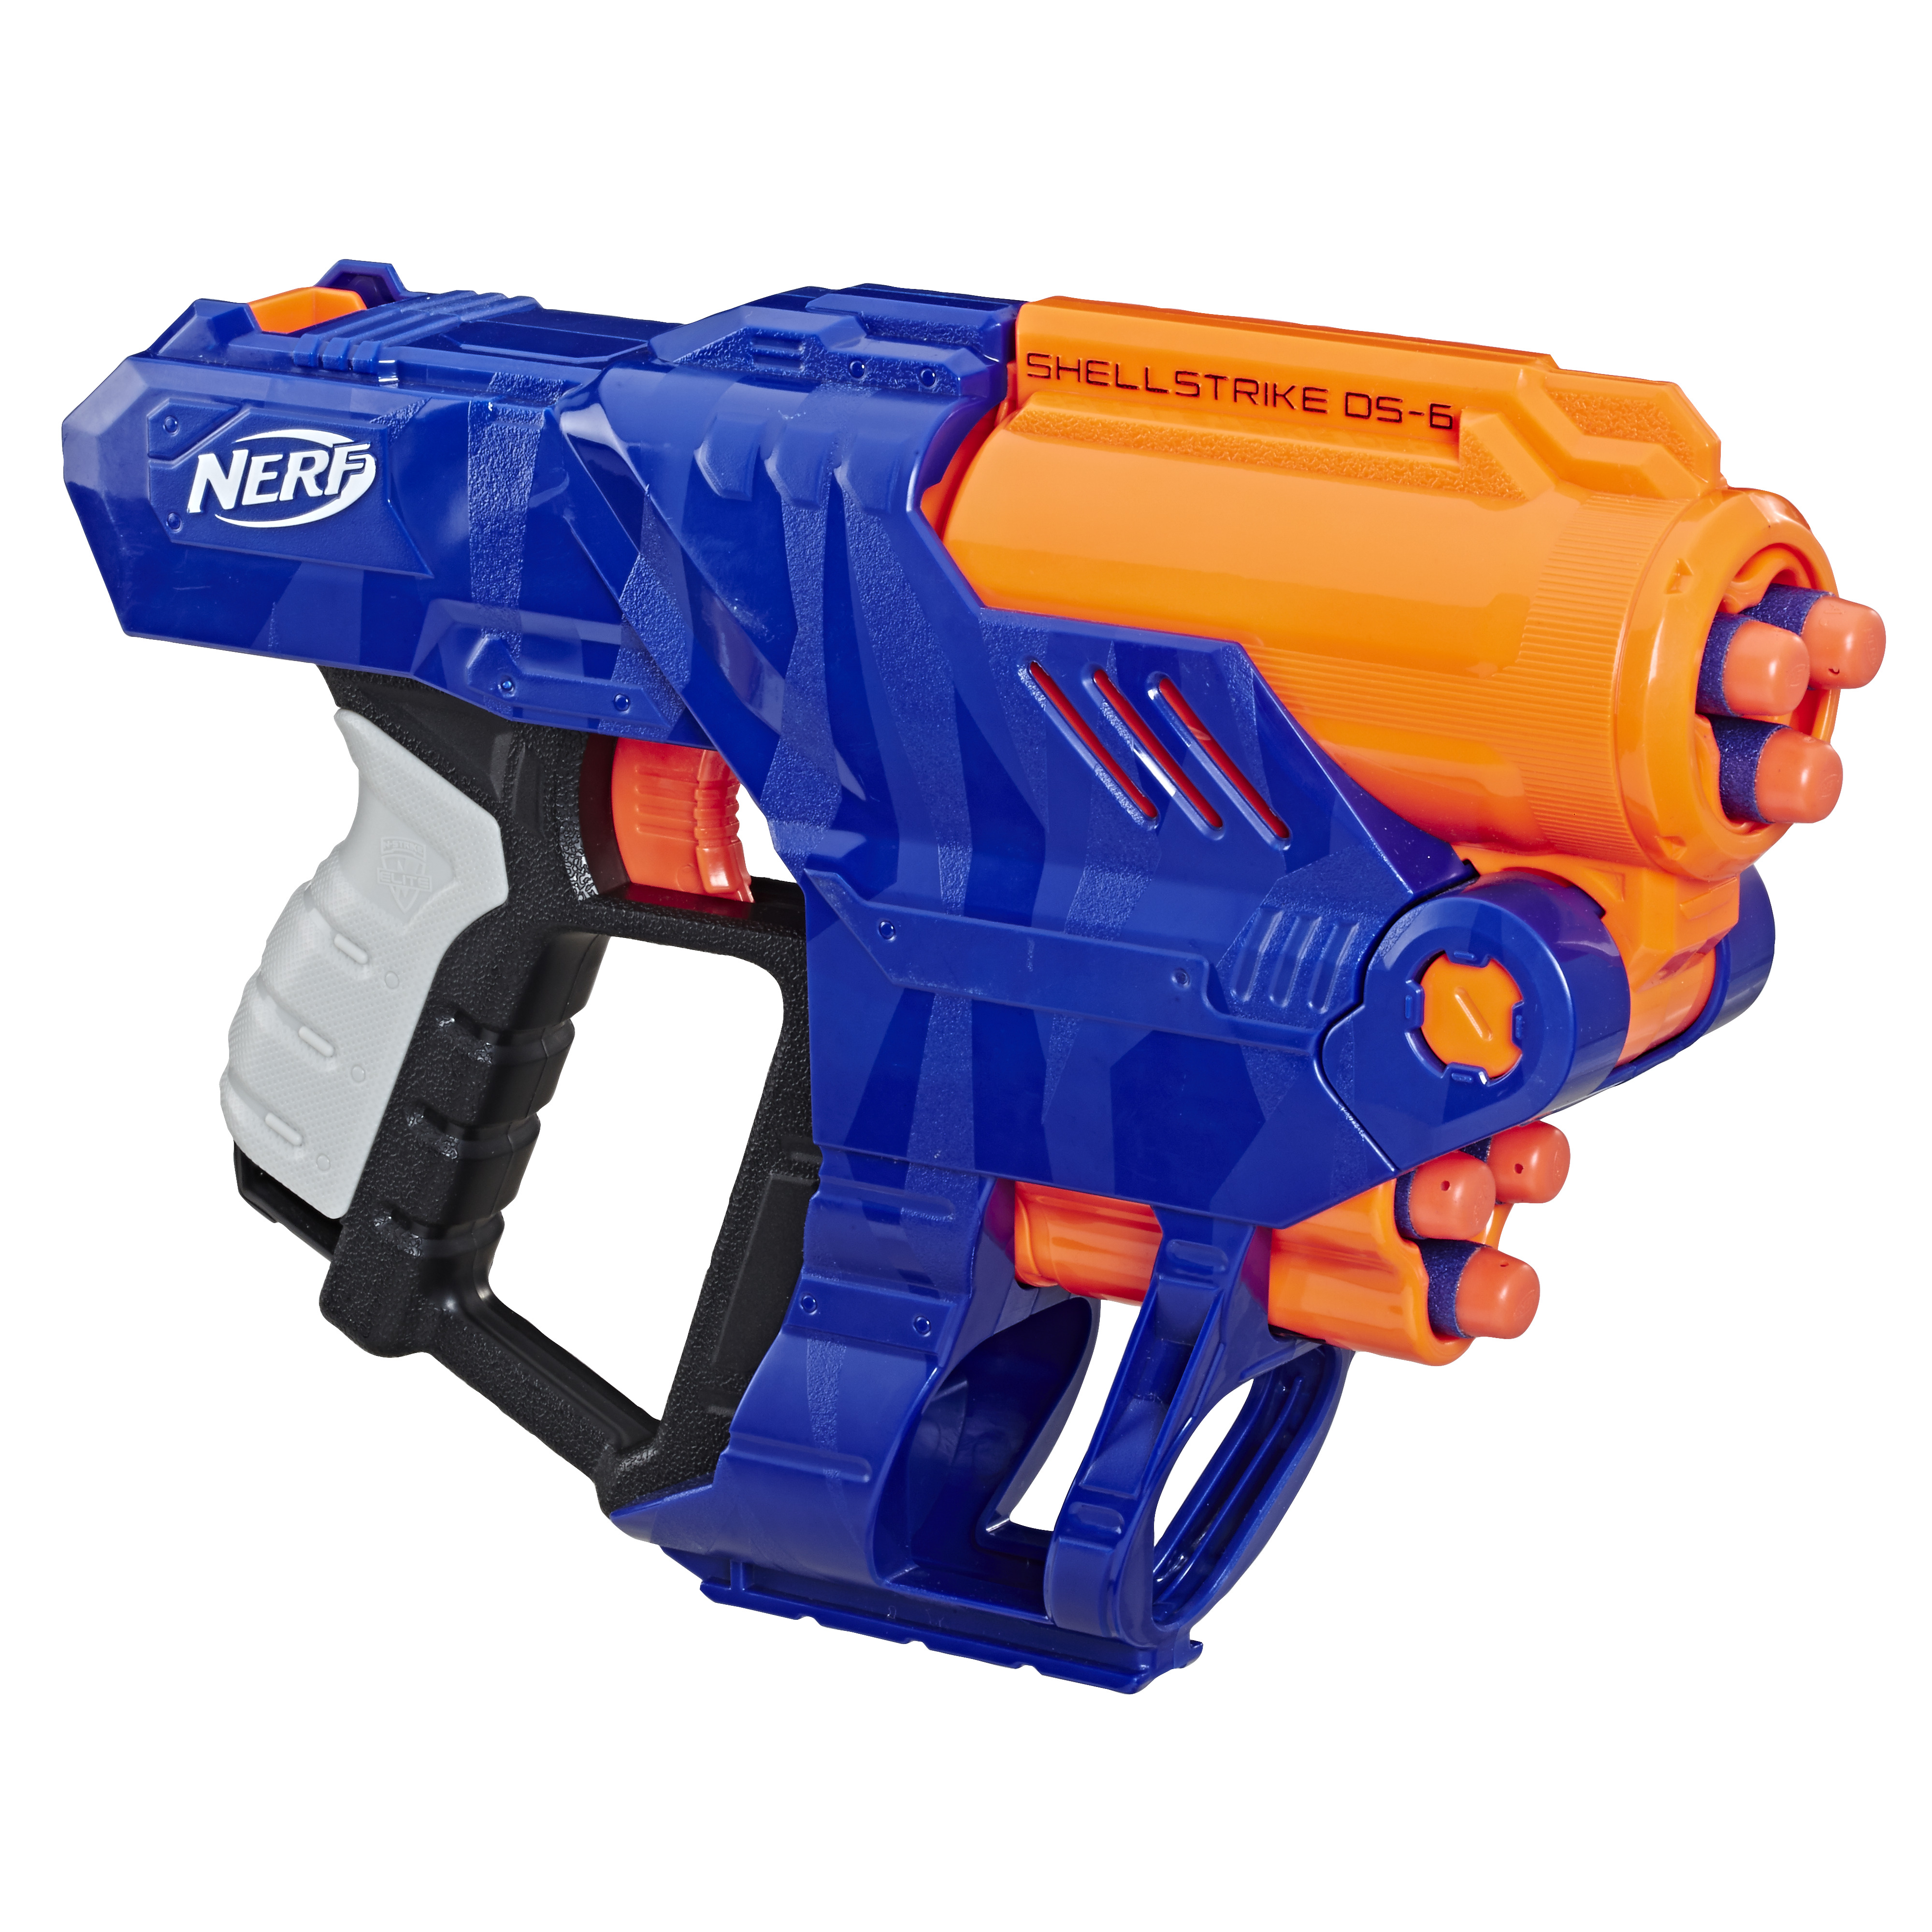 Nerf Toy Fair 2020: All the Official Blasters! | Blaster Hub